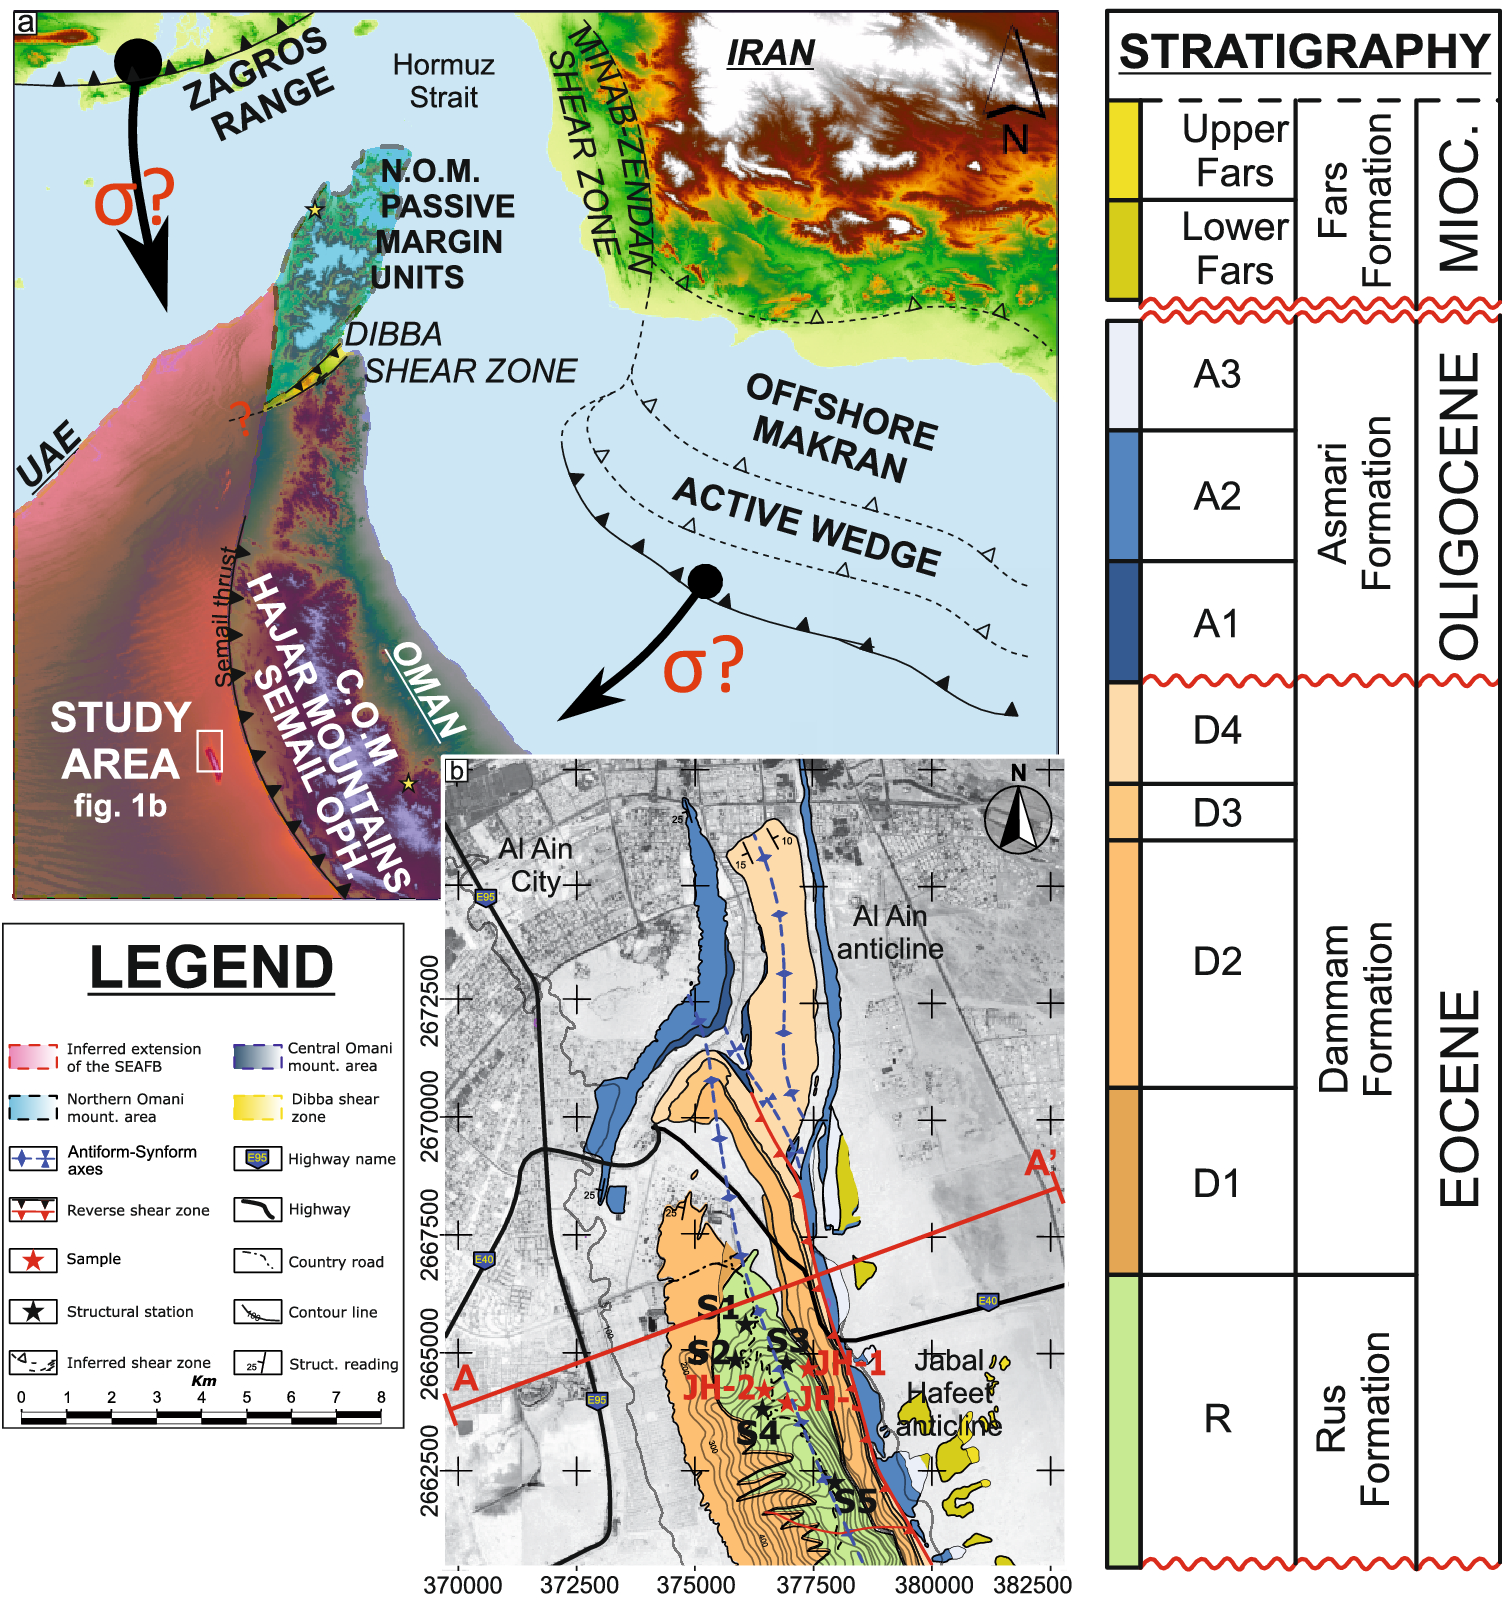 of Cenozoic Eurasia-Arabia convergence on the Southeast Foreland Basin: new geochronological and geochemical constraints from syn-kinematic carbonate mineralization | Scientific Reports